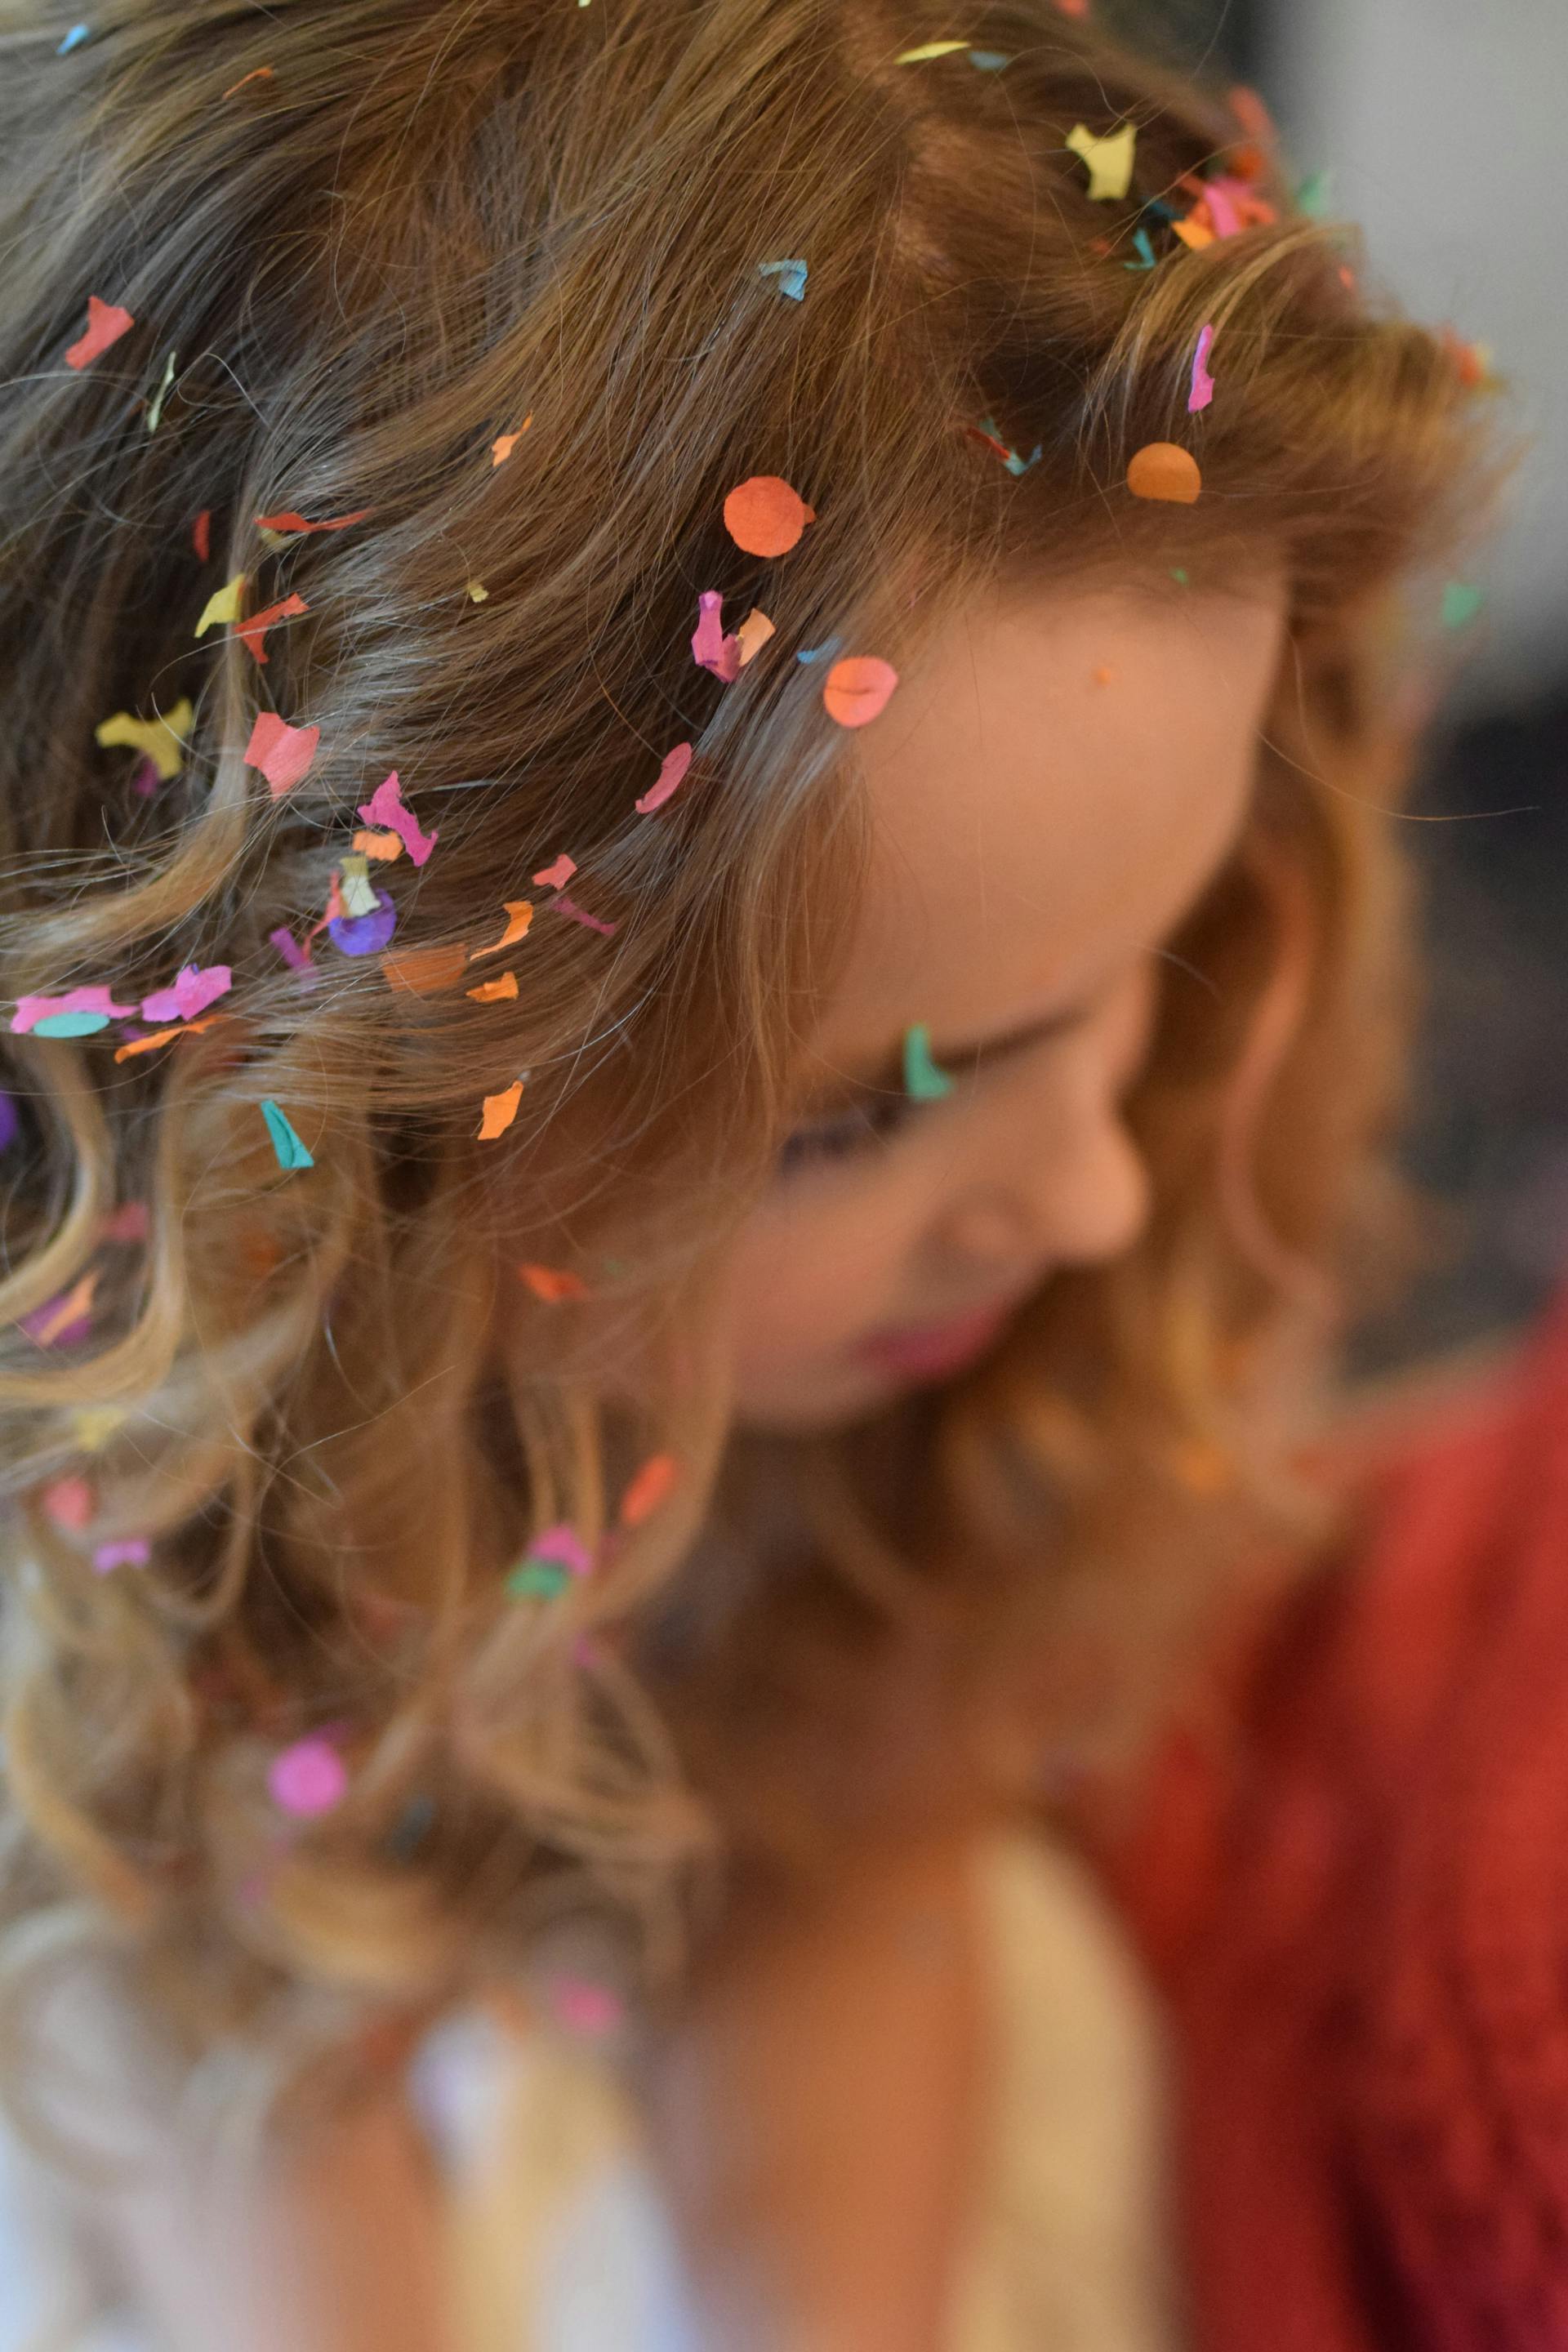 A brown-haired woman with confetti in her hair | Source: Pexels